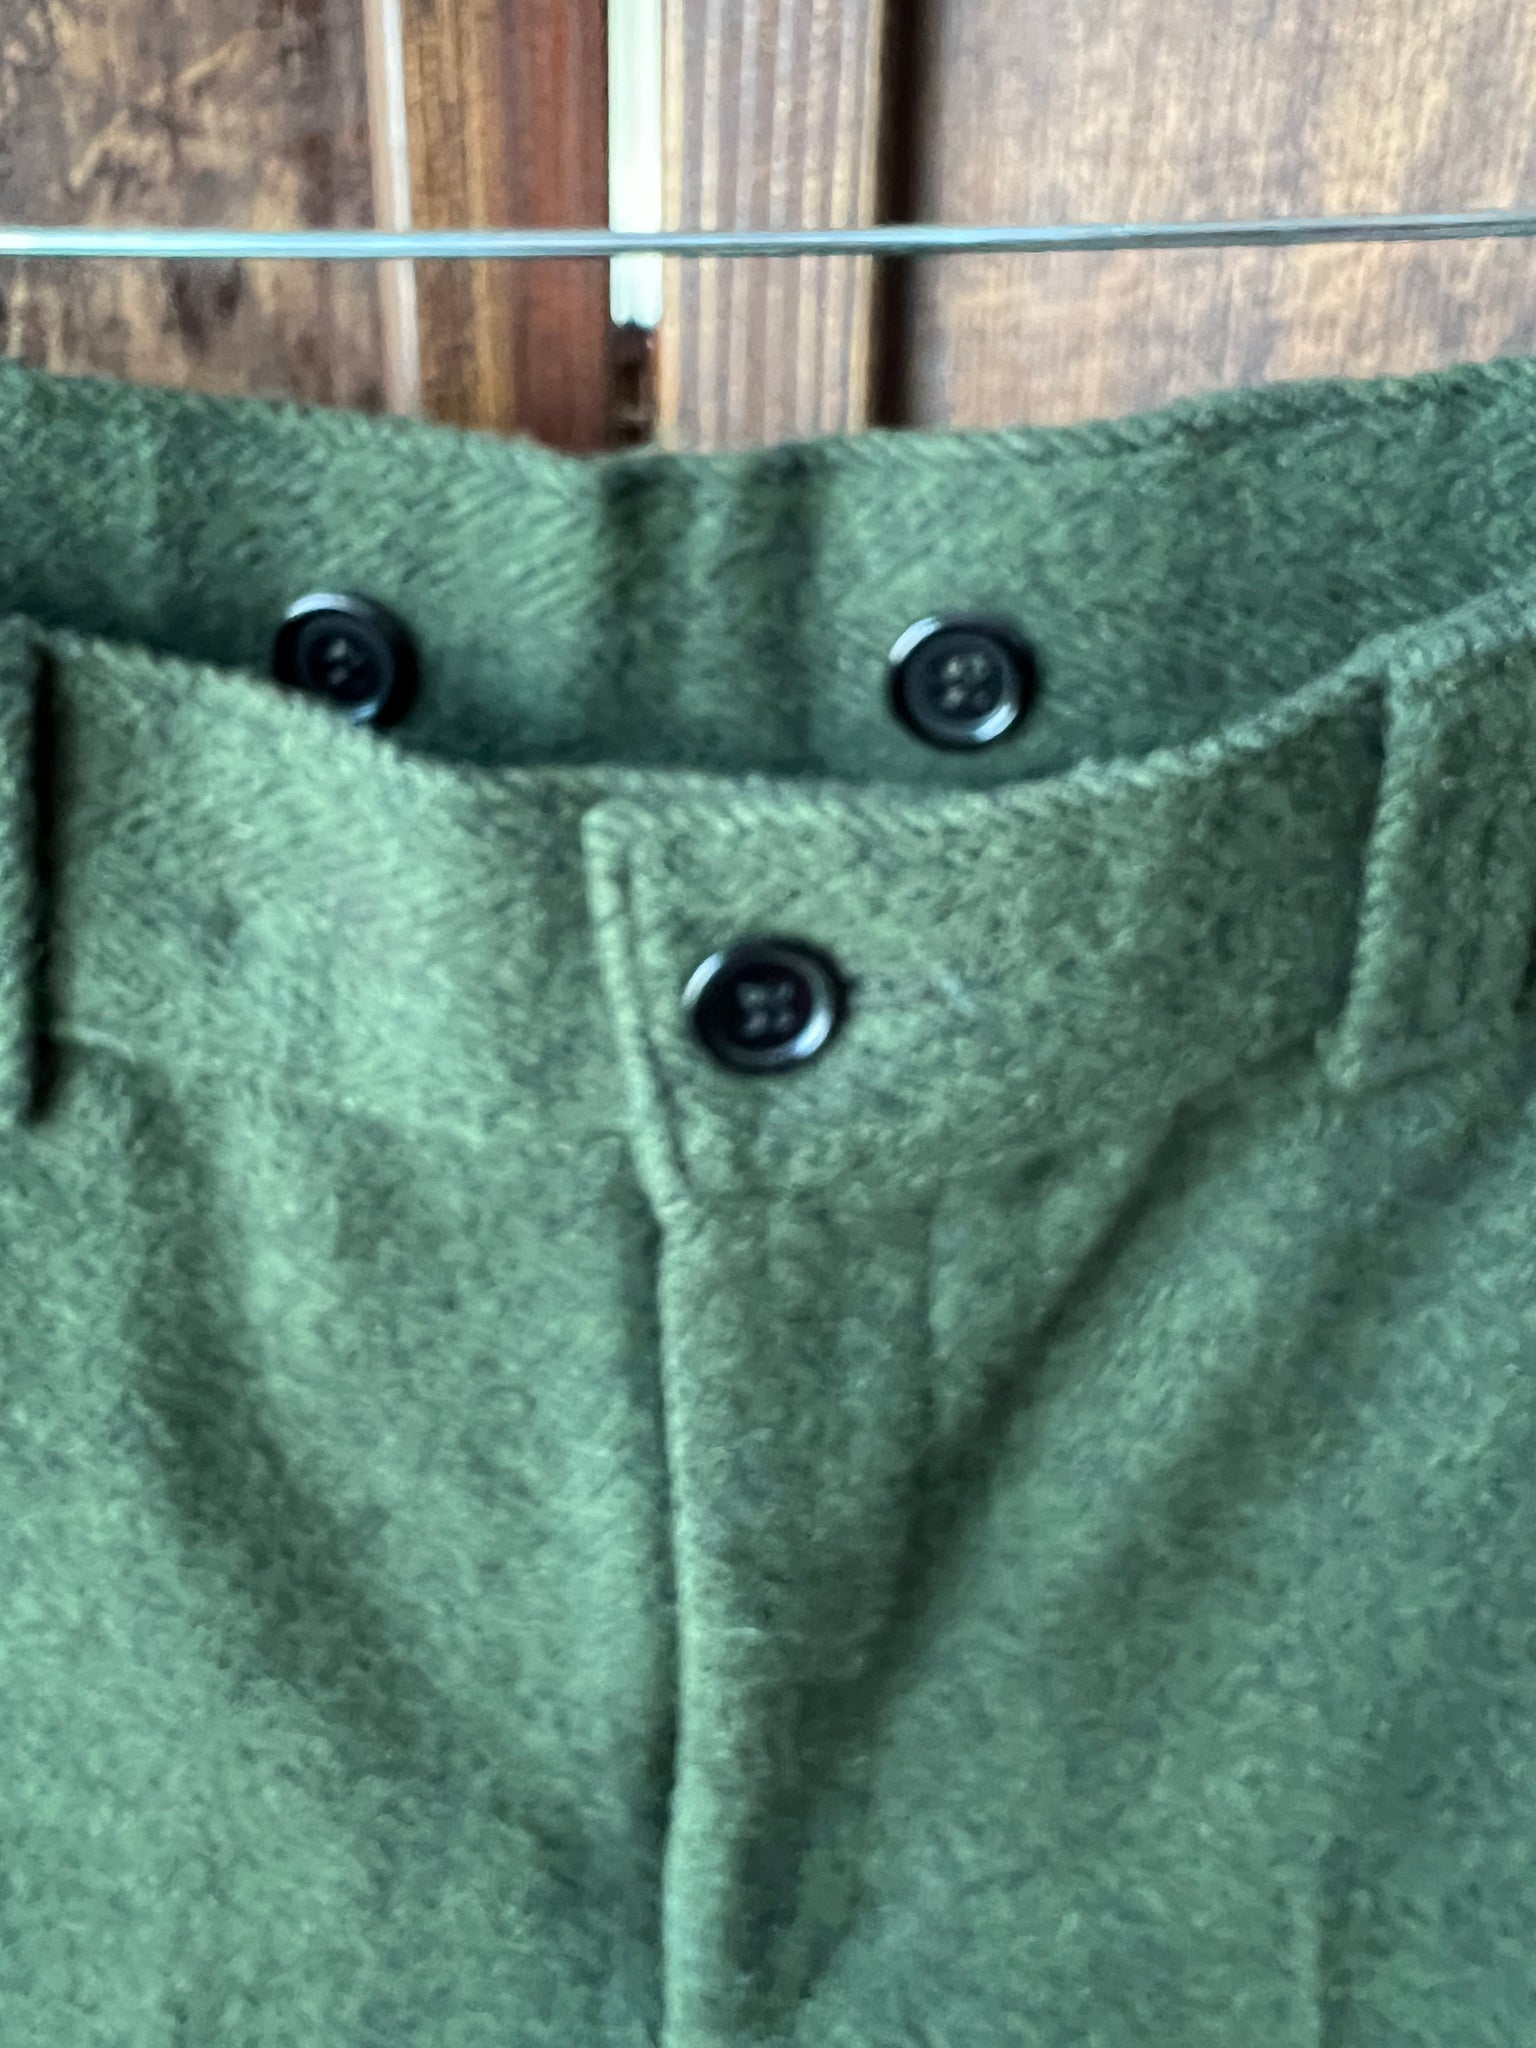 1970s MENS PANTS- Olive green boiled wool